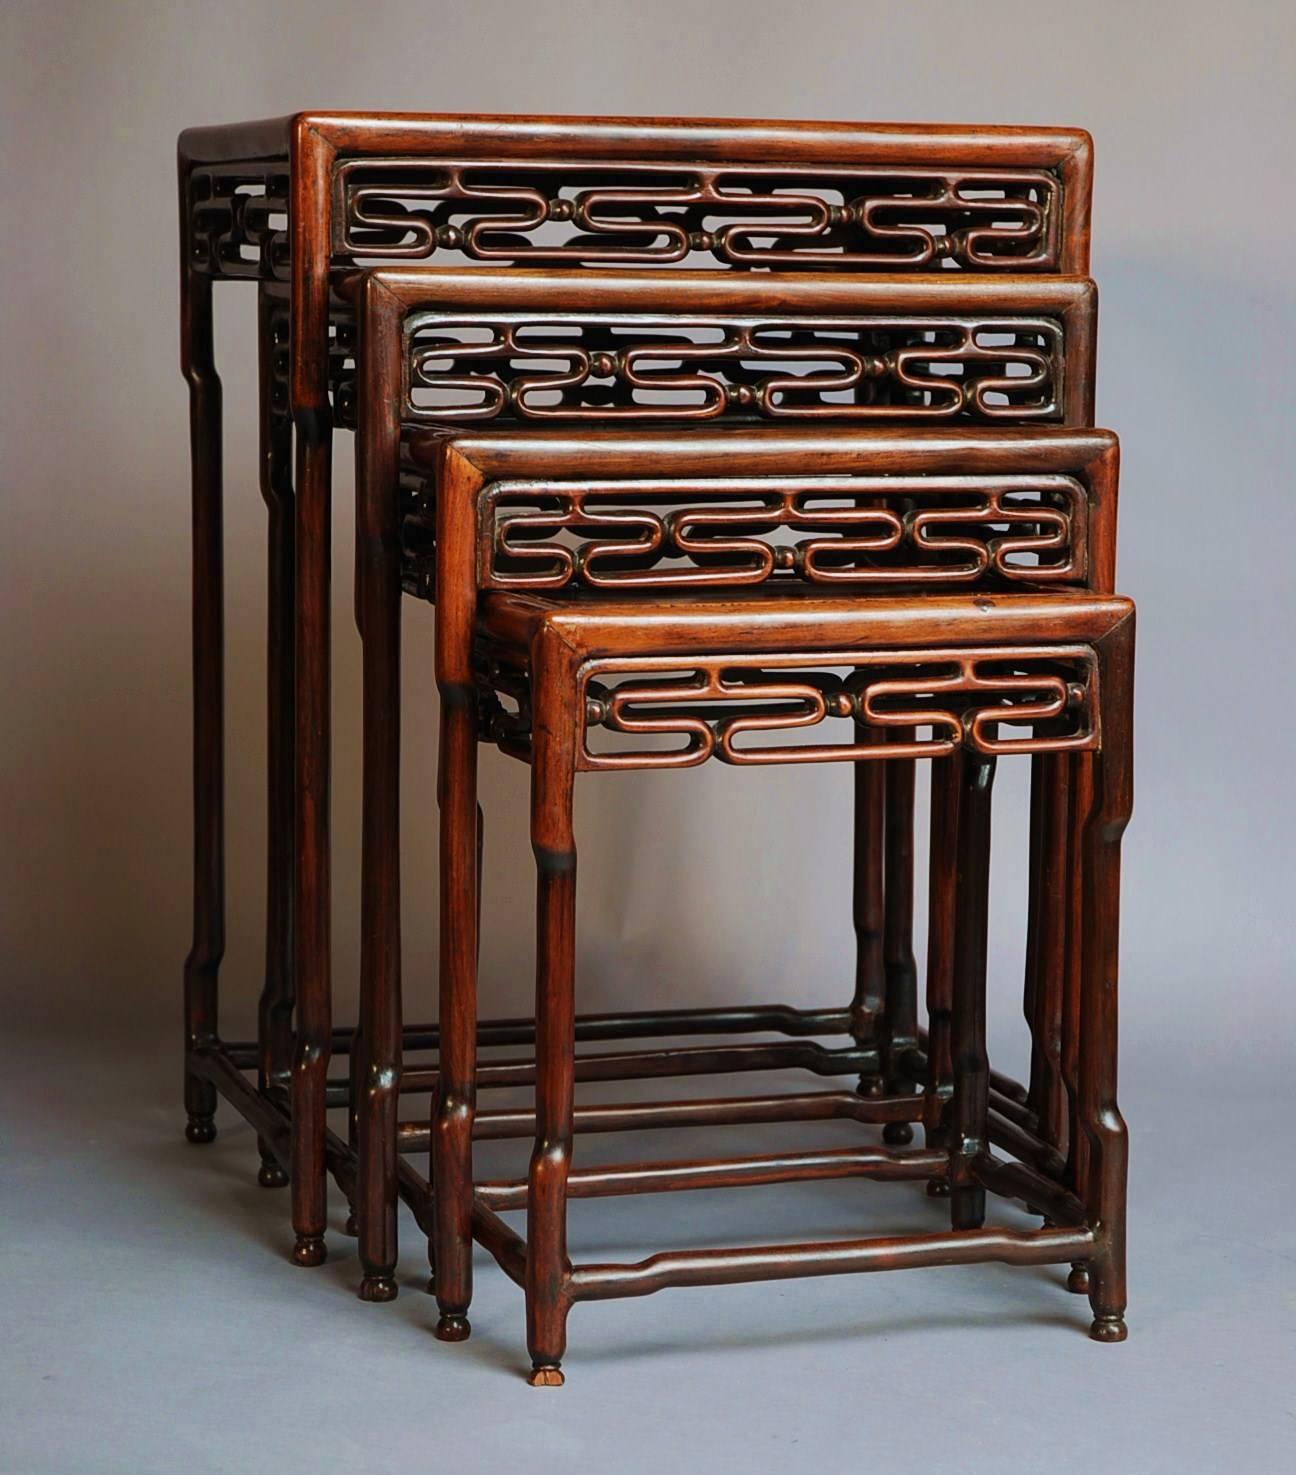 A late 19th century set of four graduated 'Quartetto' Chinese hardwood tables of good patina (color).

Each table consists of hardwood top with a carved geometric design frieze leading down to the legs being of bamboo design and joined by bamboo